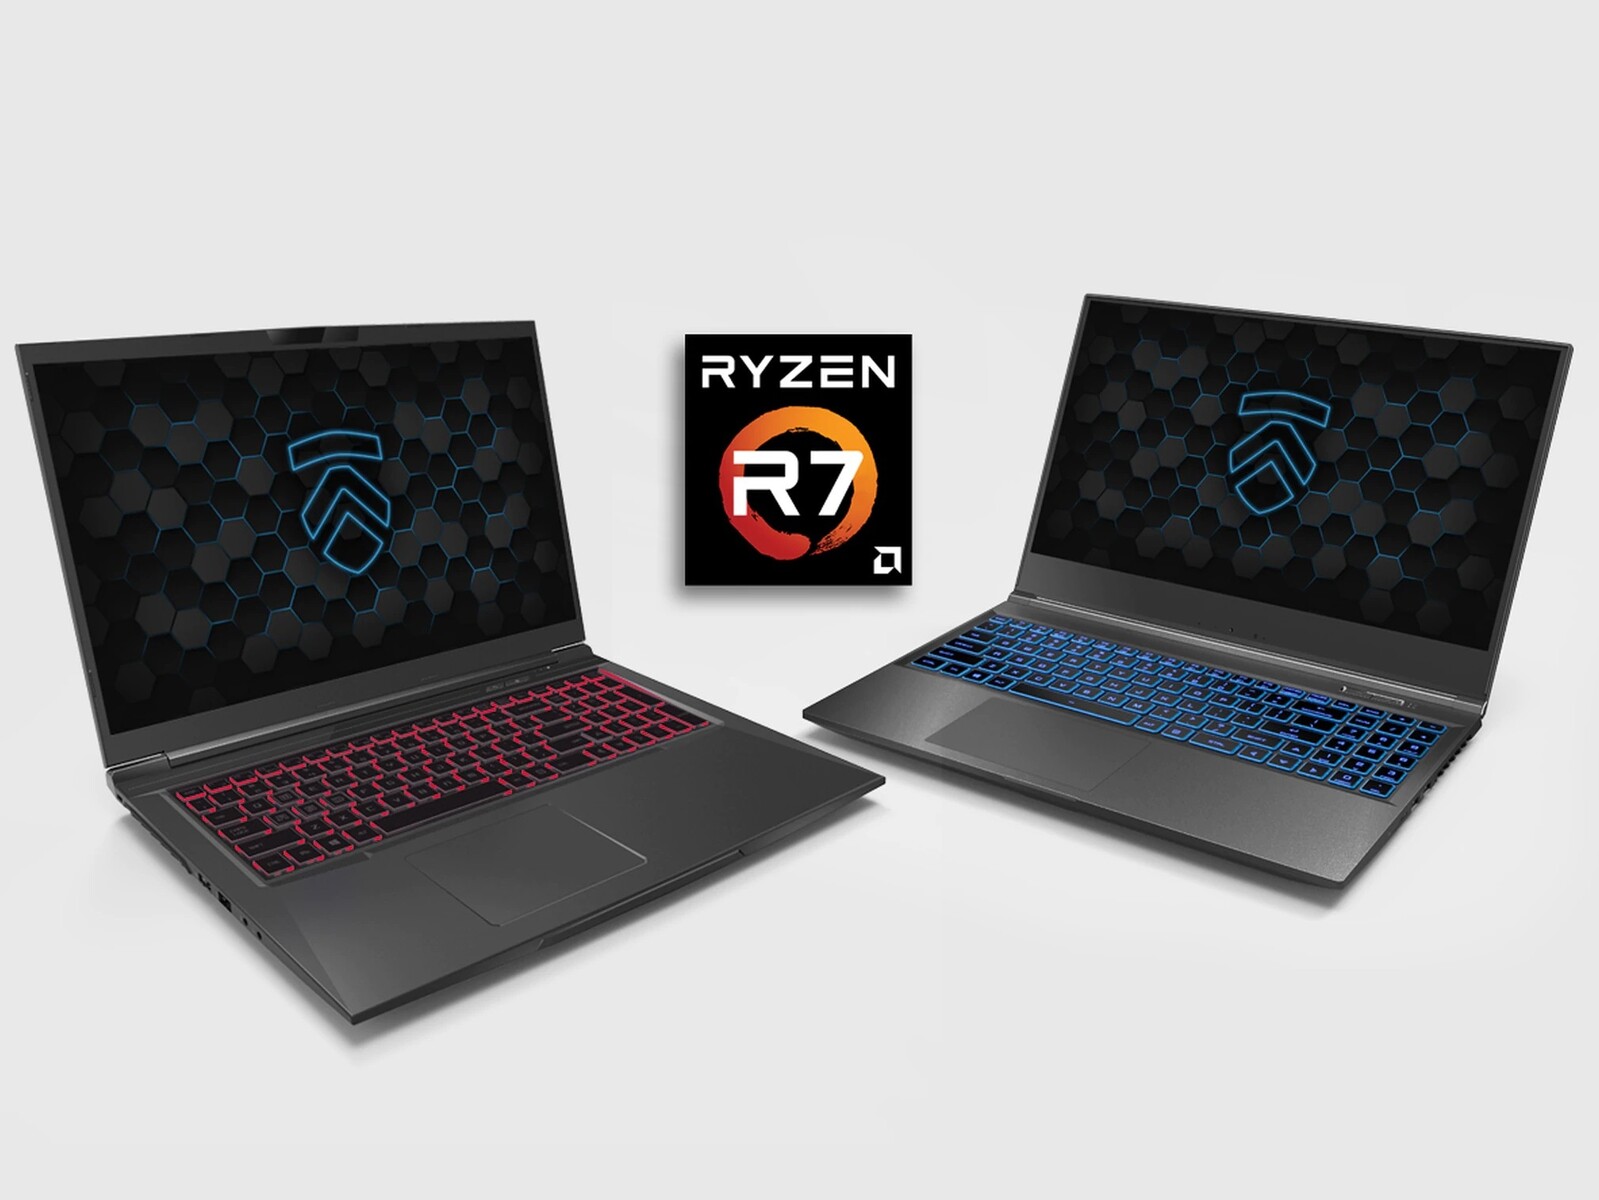 Where are all the AMD Ryzen 7 GeForce RTX 2070 laptops? These Eluktronics models are proof that we're ready for them